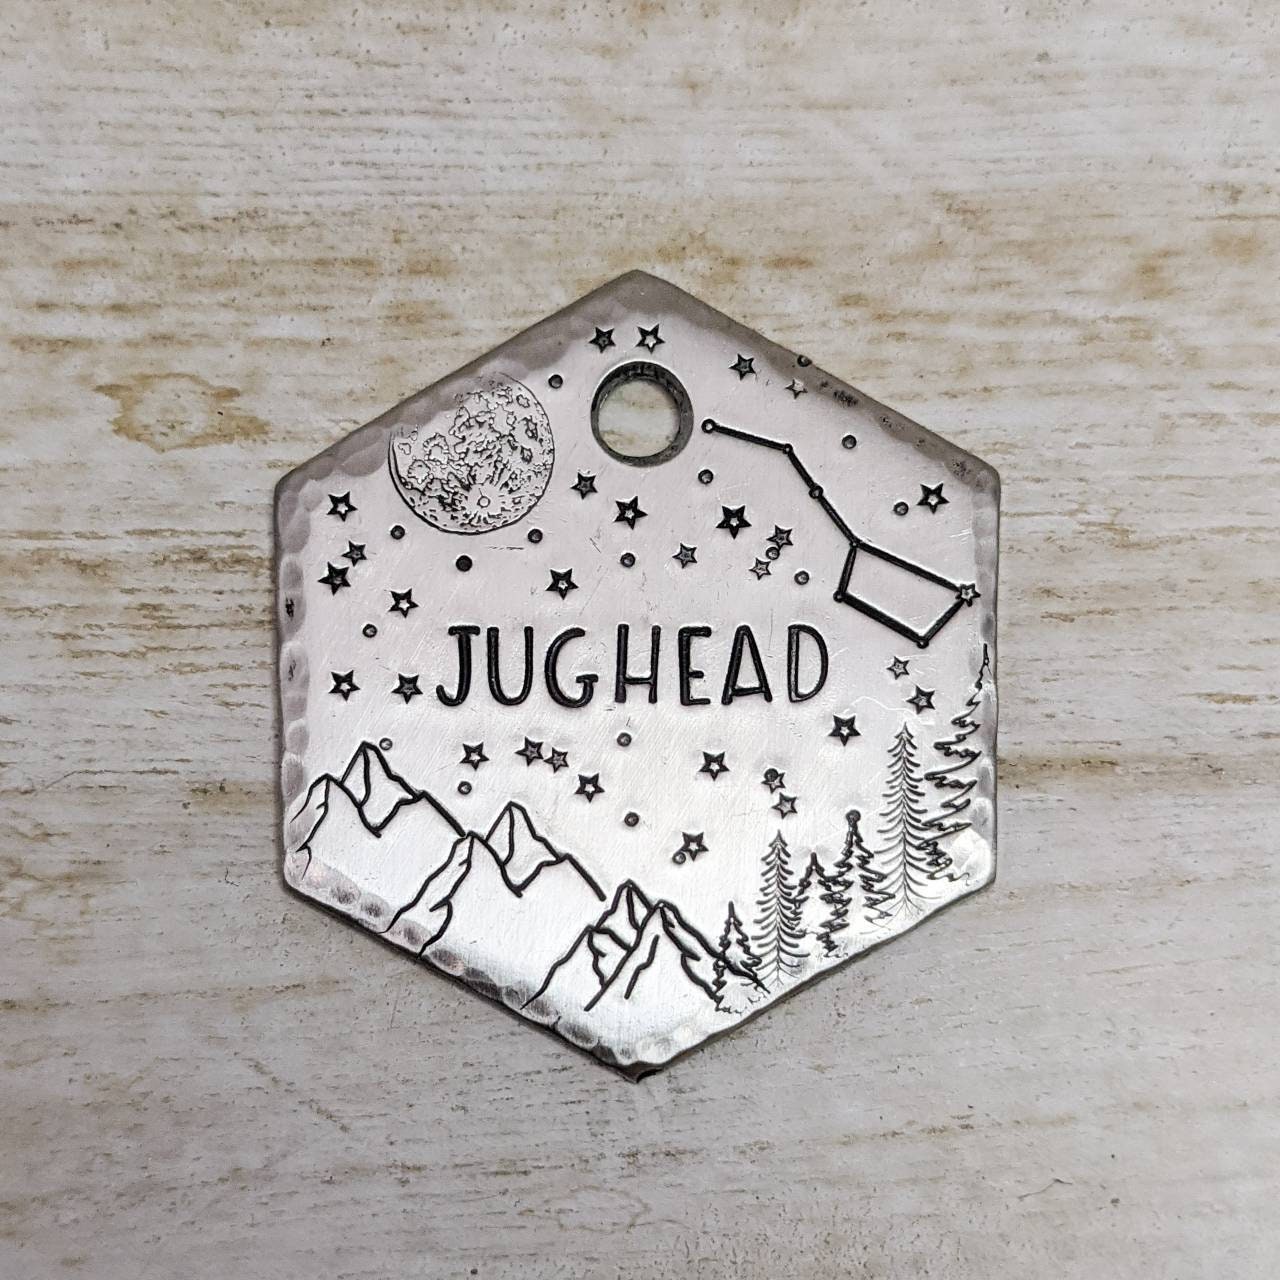 Dipper night sky ID Tag Name tag for dog Handstamped Pet ID | Etsy